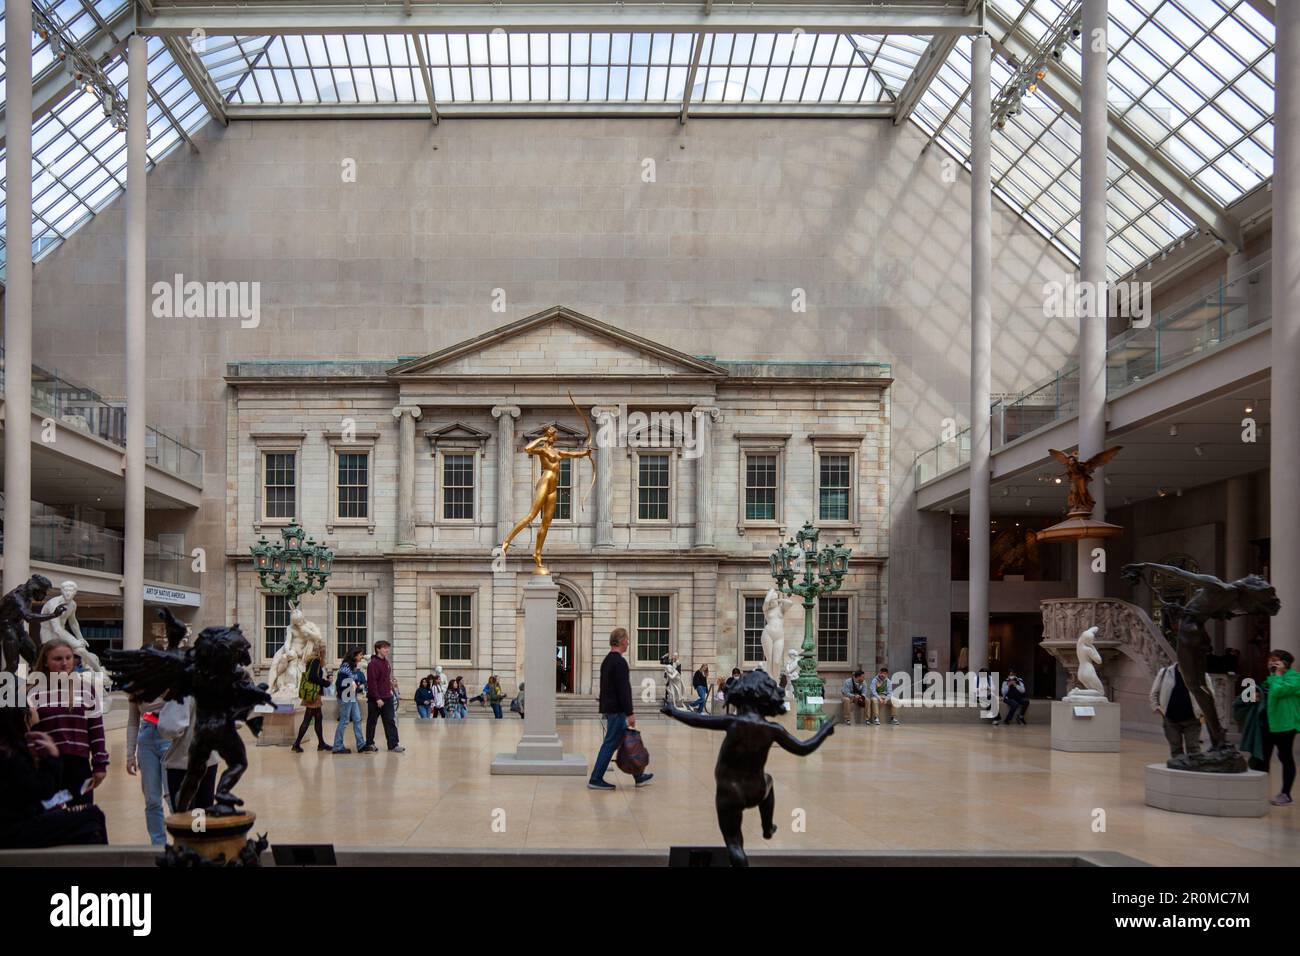 The American Wing Atrium at the Metropolitan Museum in New York, USA Stock Photo